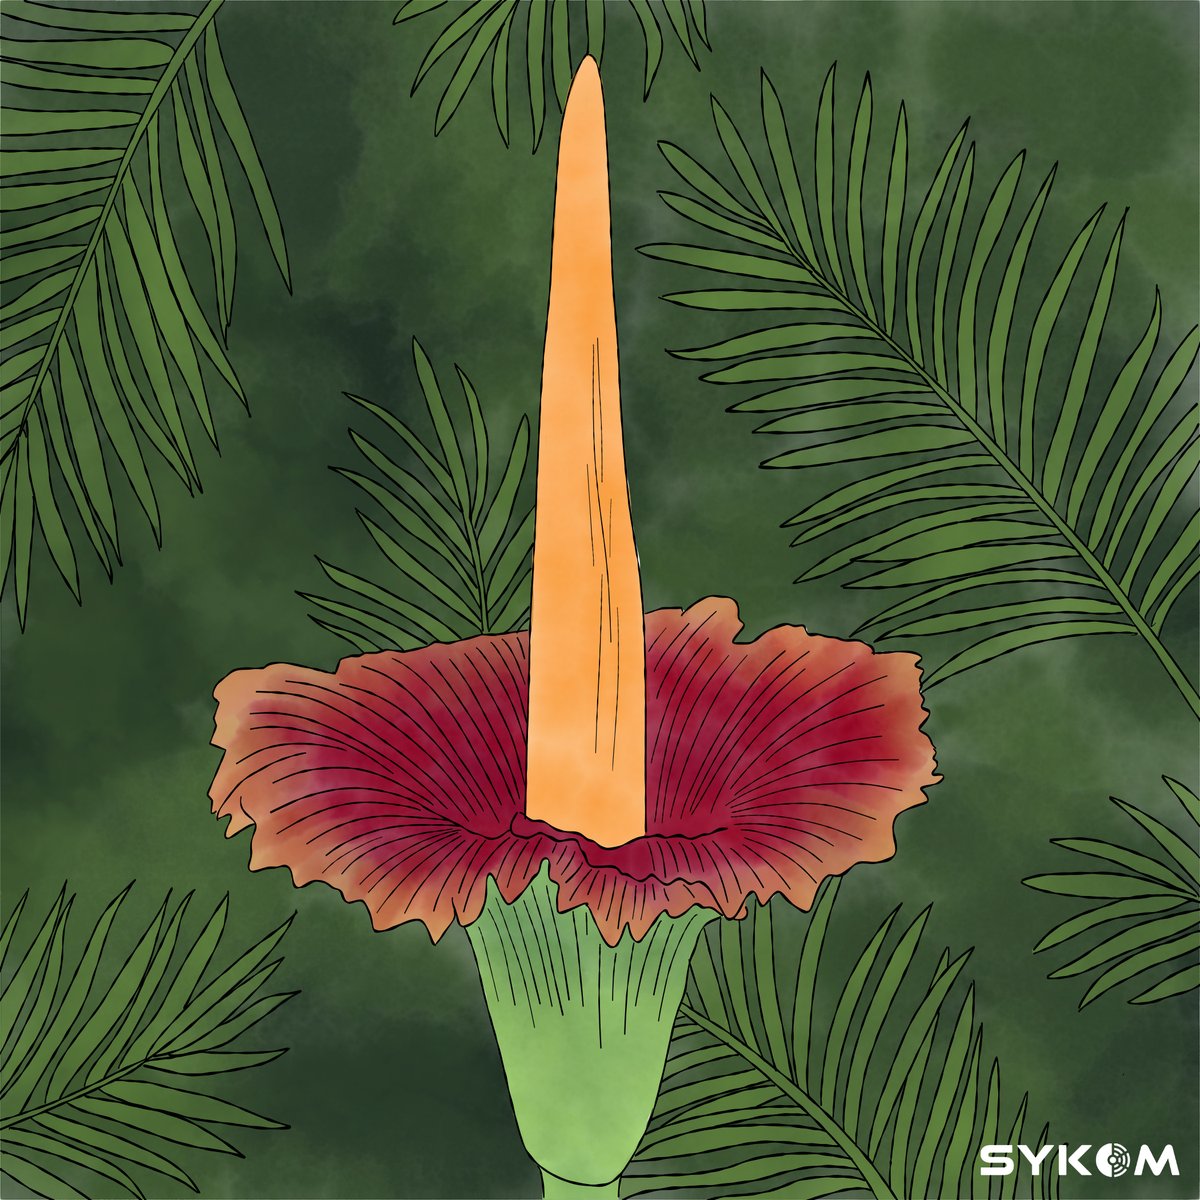 Happy Halloween! The last spooky nature illustration for this October is the corpse flower. When this rare plant blooms, the flower can reach >10 feet! Its name comes from the stench of rotting meat and heat it gives off to attract beetles and flies for pollination. #scicomm